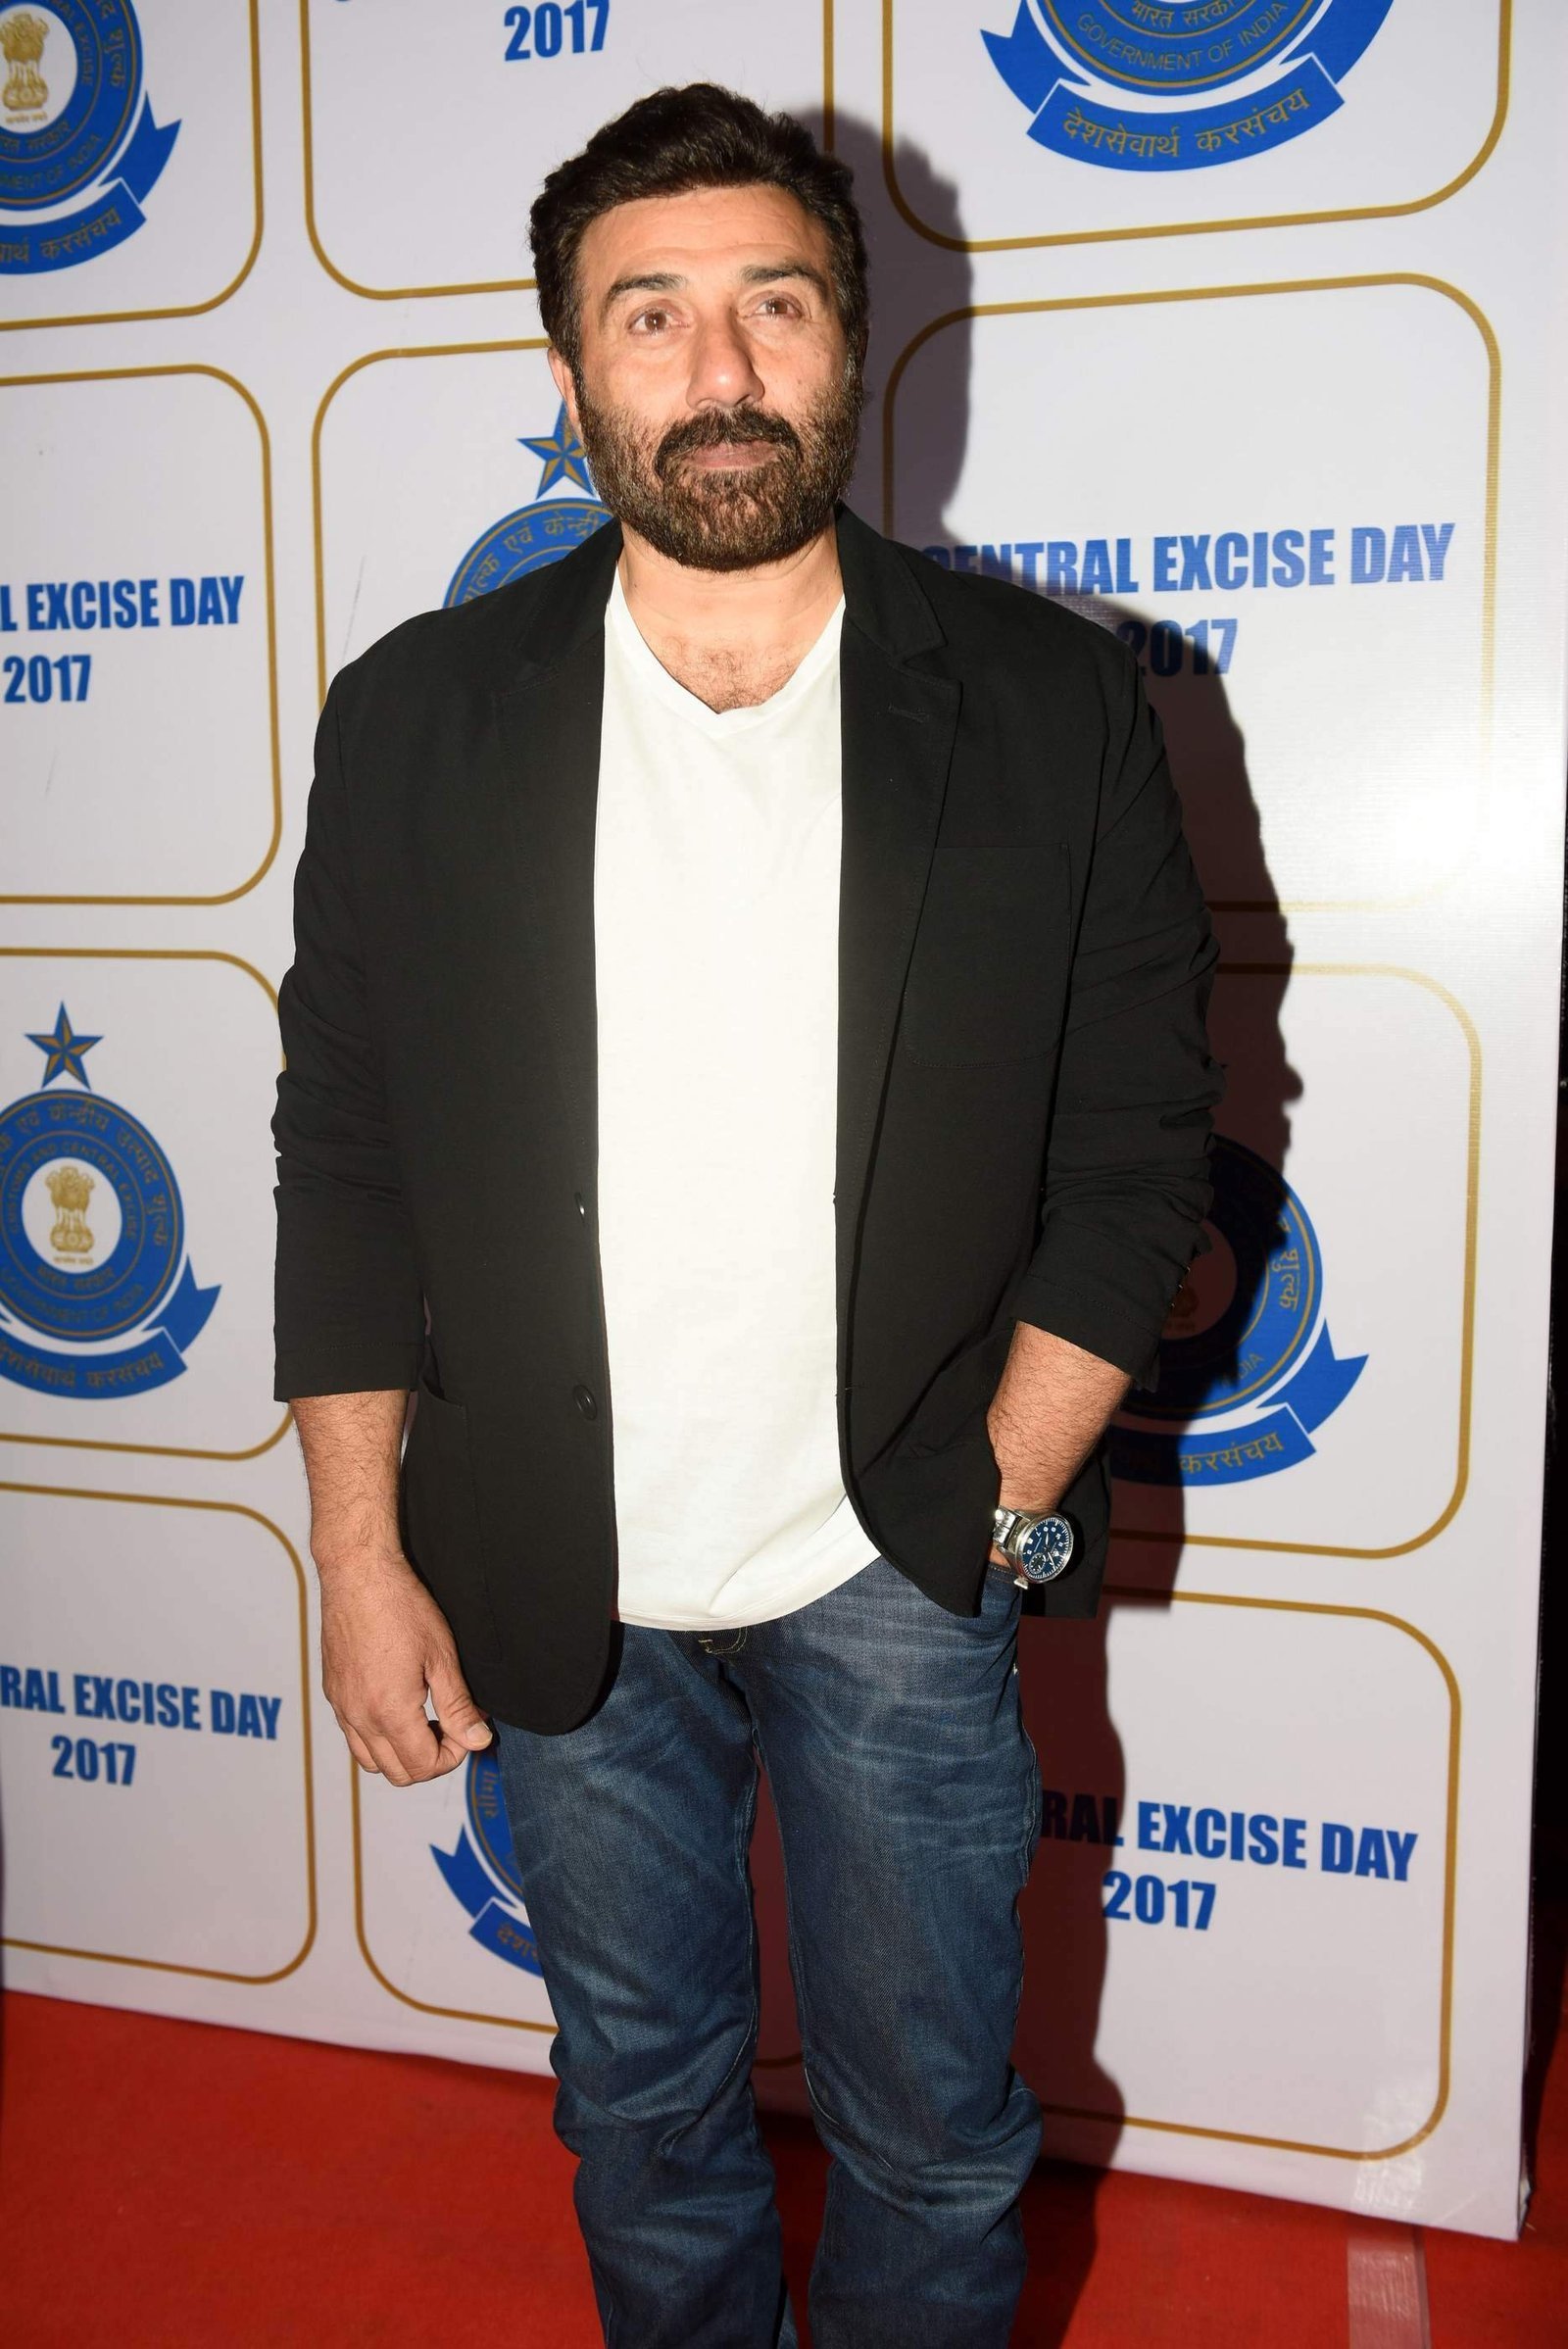 Sunny Deol - Bollywood celebrities attended Central Excise Day Celebration Images | Picture 1475753